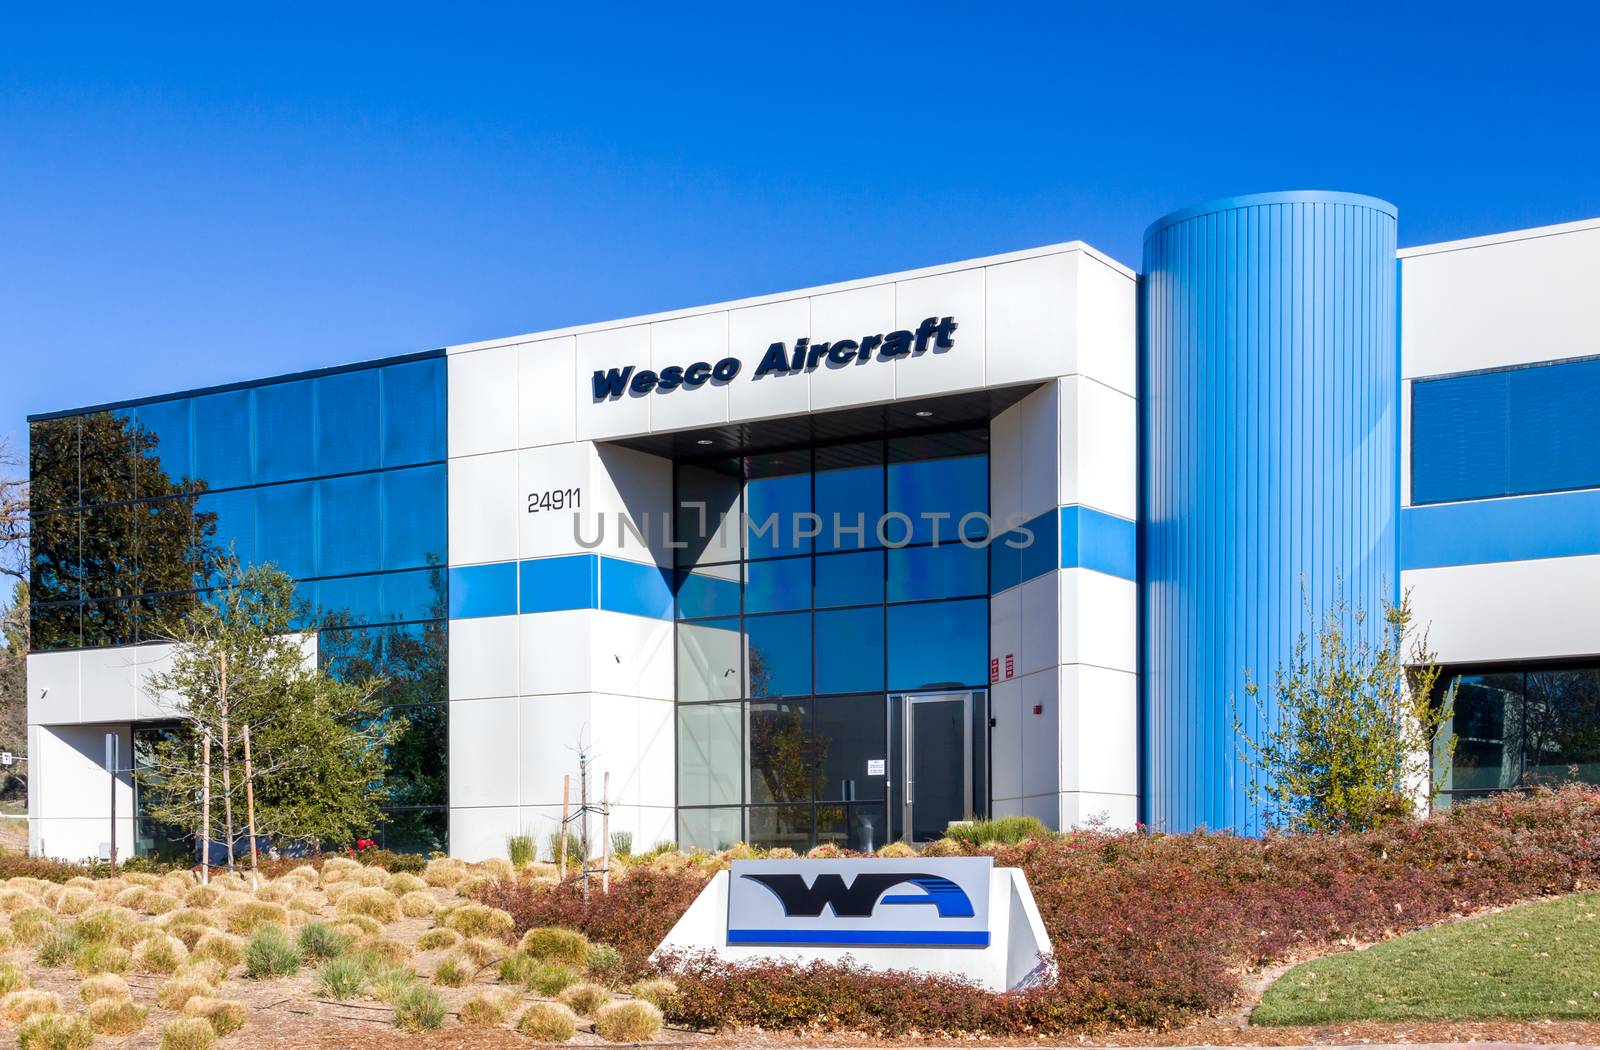 VALENCIA CA/USA - DECEMBER 26, 2015: Wesco Aircraft corporate headquarters. Wesco Aircraft provides supply chain management services to the aerospace industry.